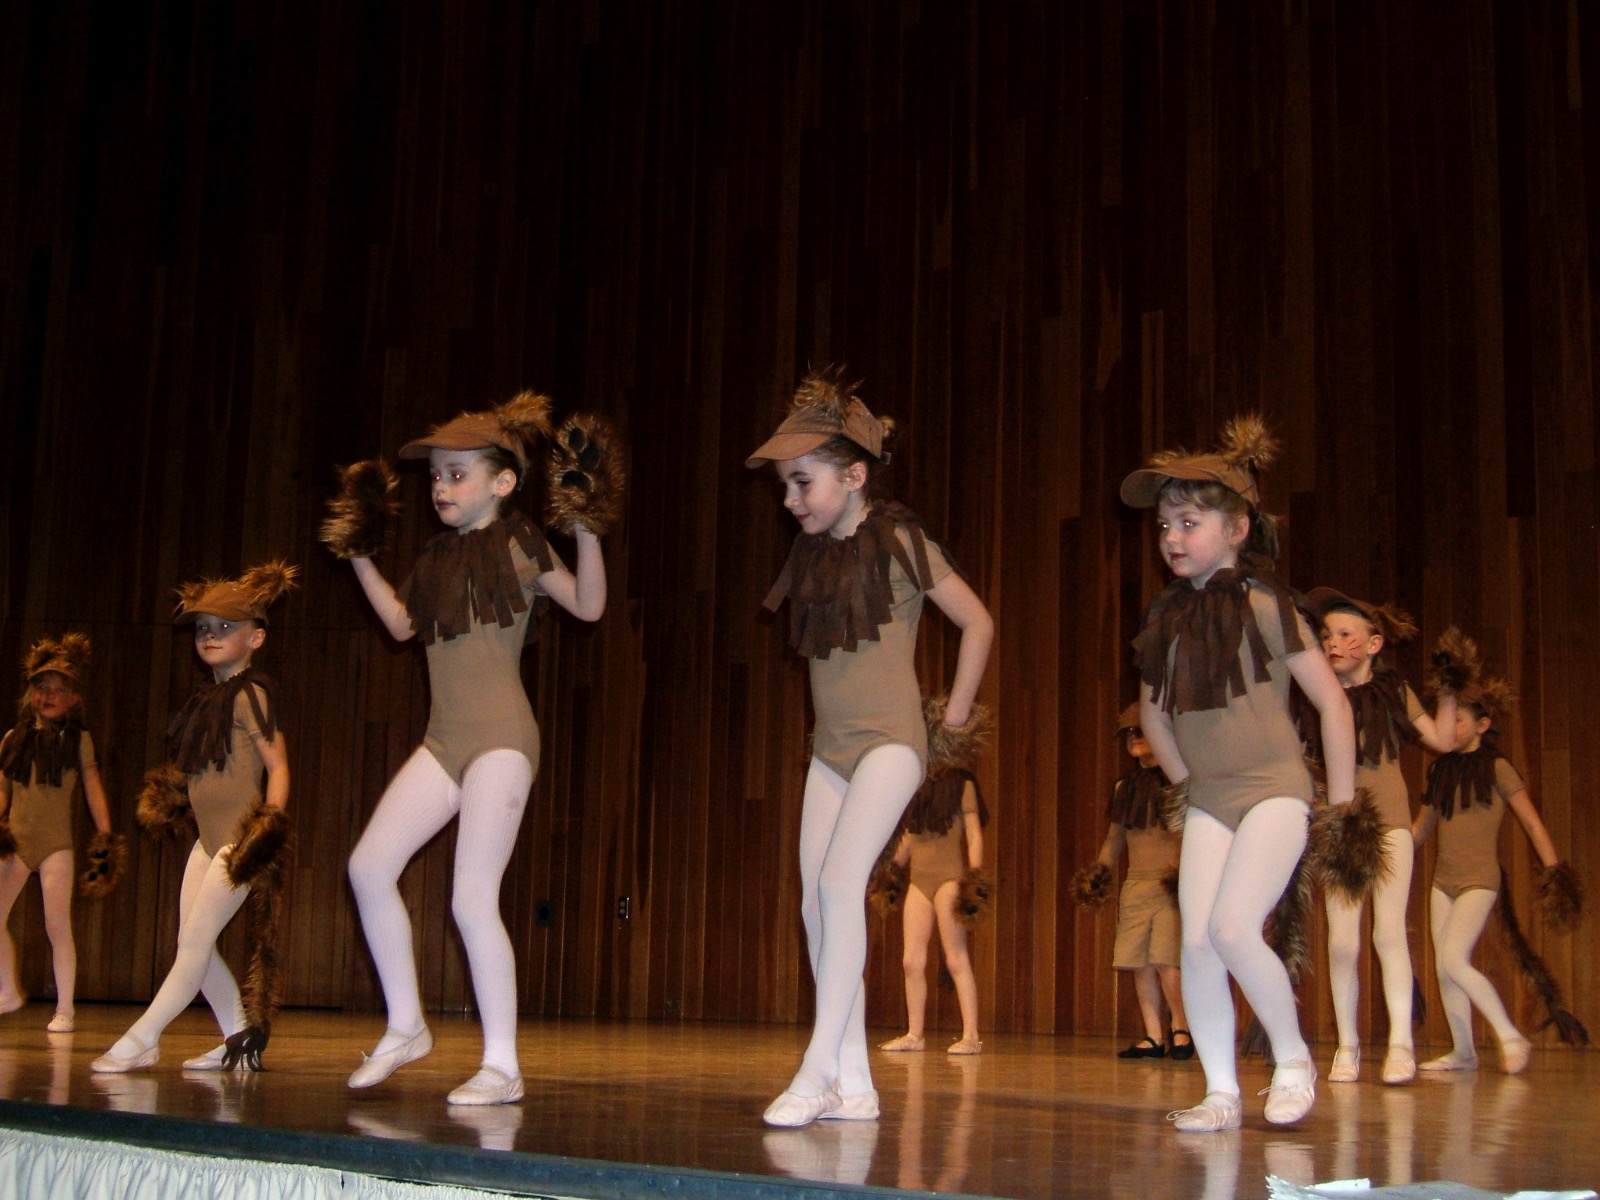 4-5 year old kids dressed as lion ballerinas and dancing